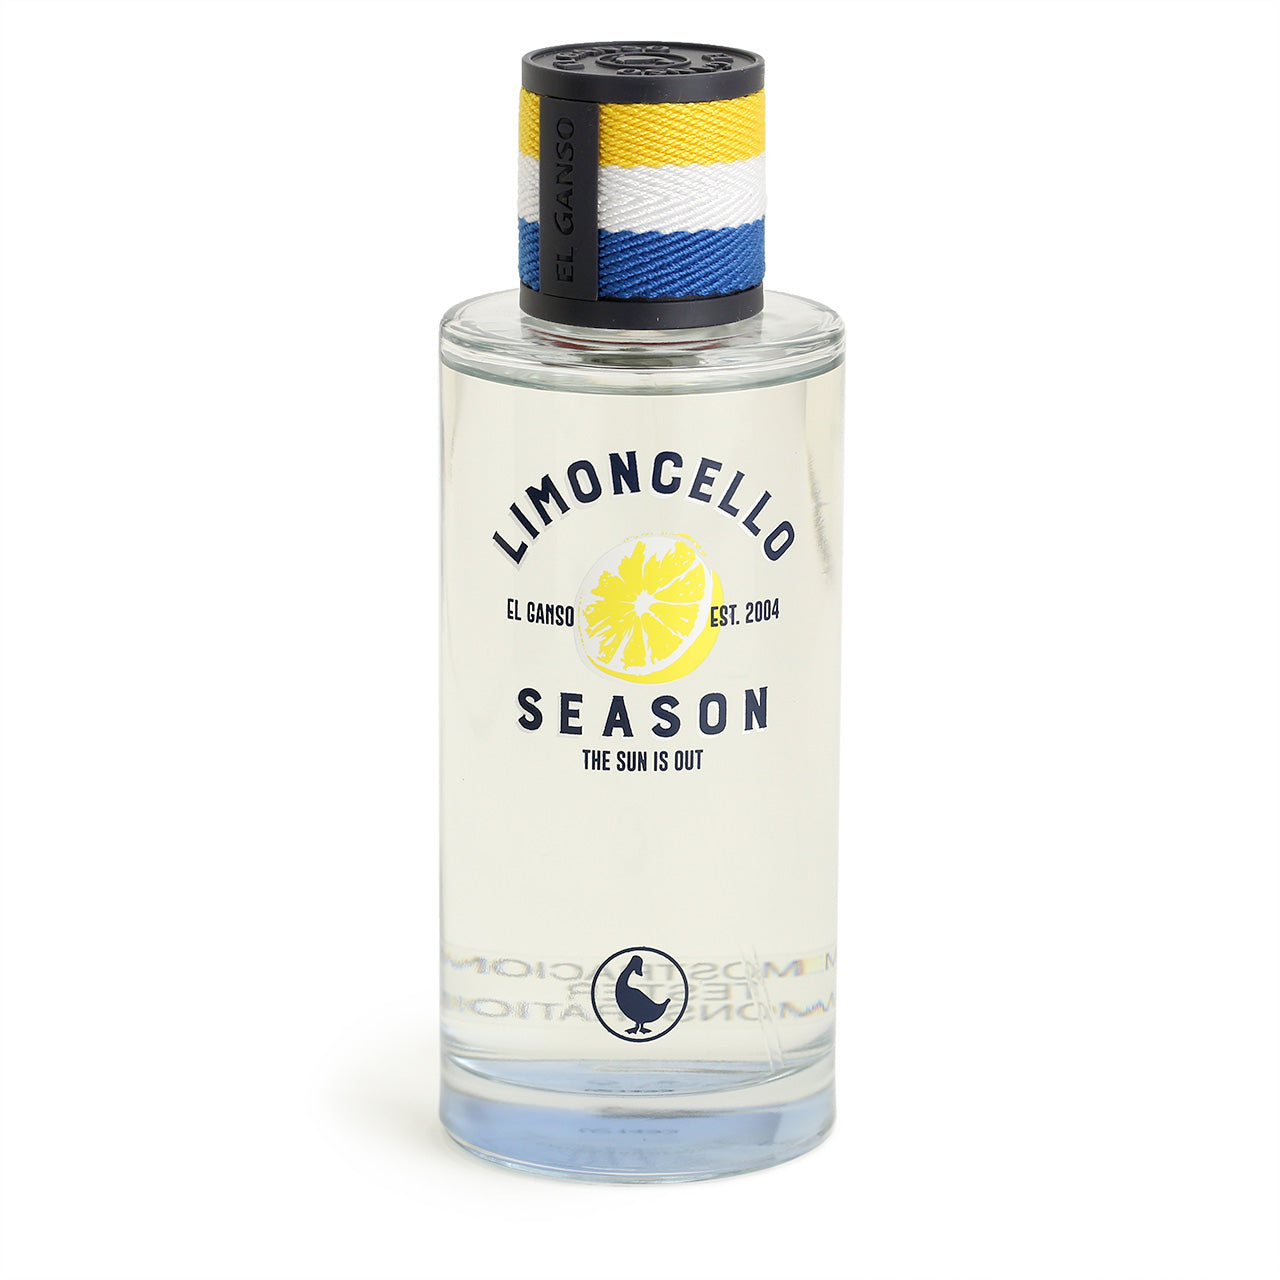 El Ganso Limoncello EDT bottle with it's graphic lemonsliced packaging